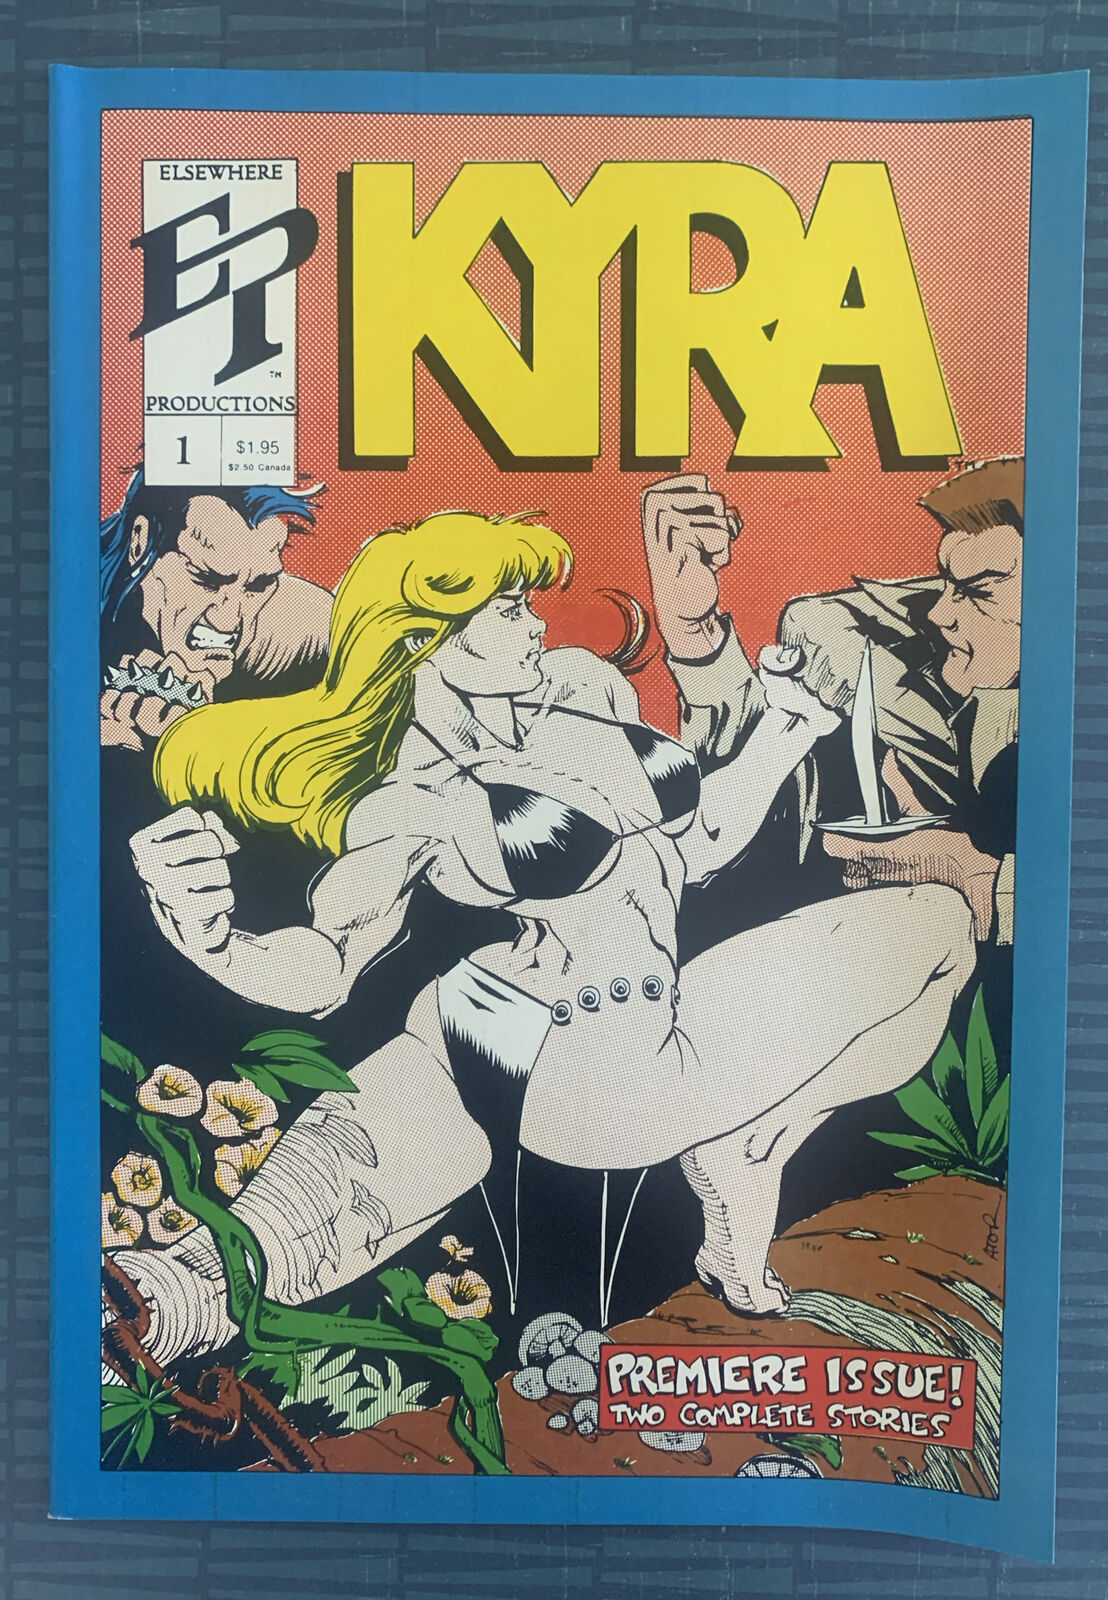 Kyra #1 (1985) Elsewhere Productions